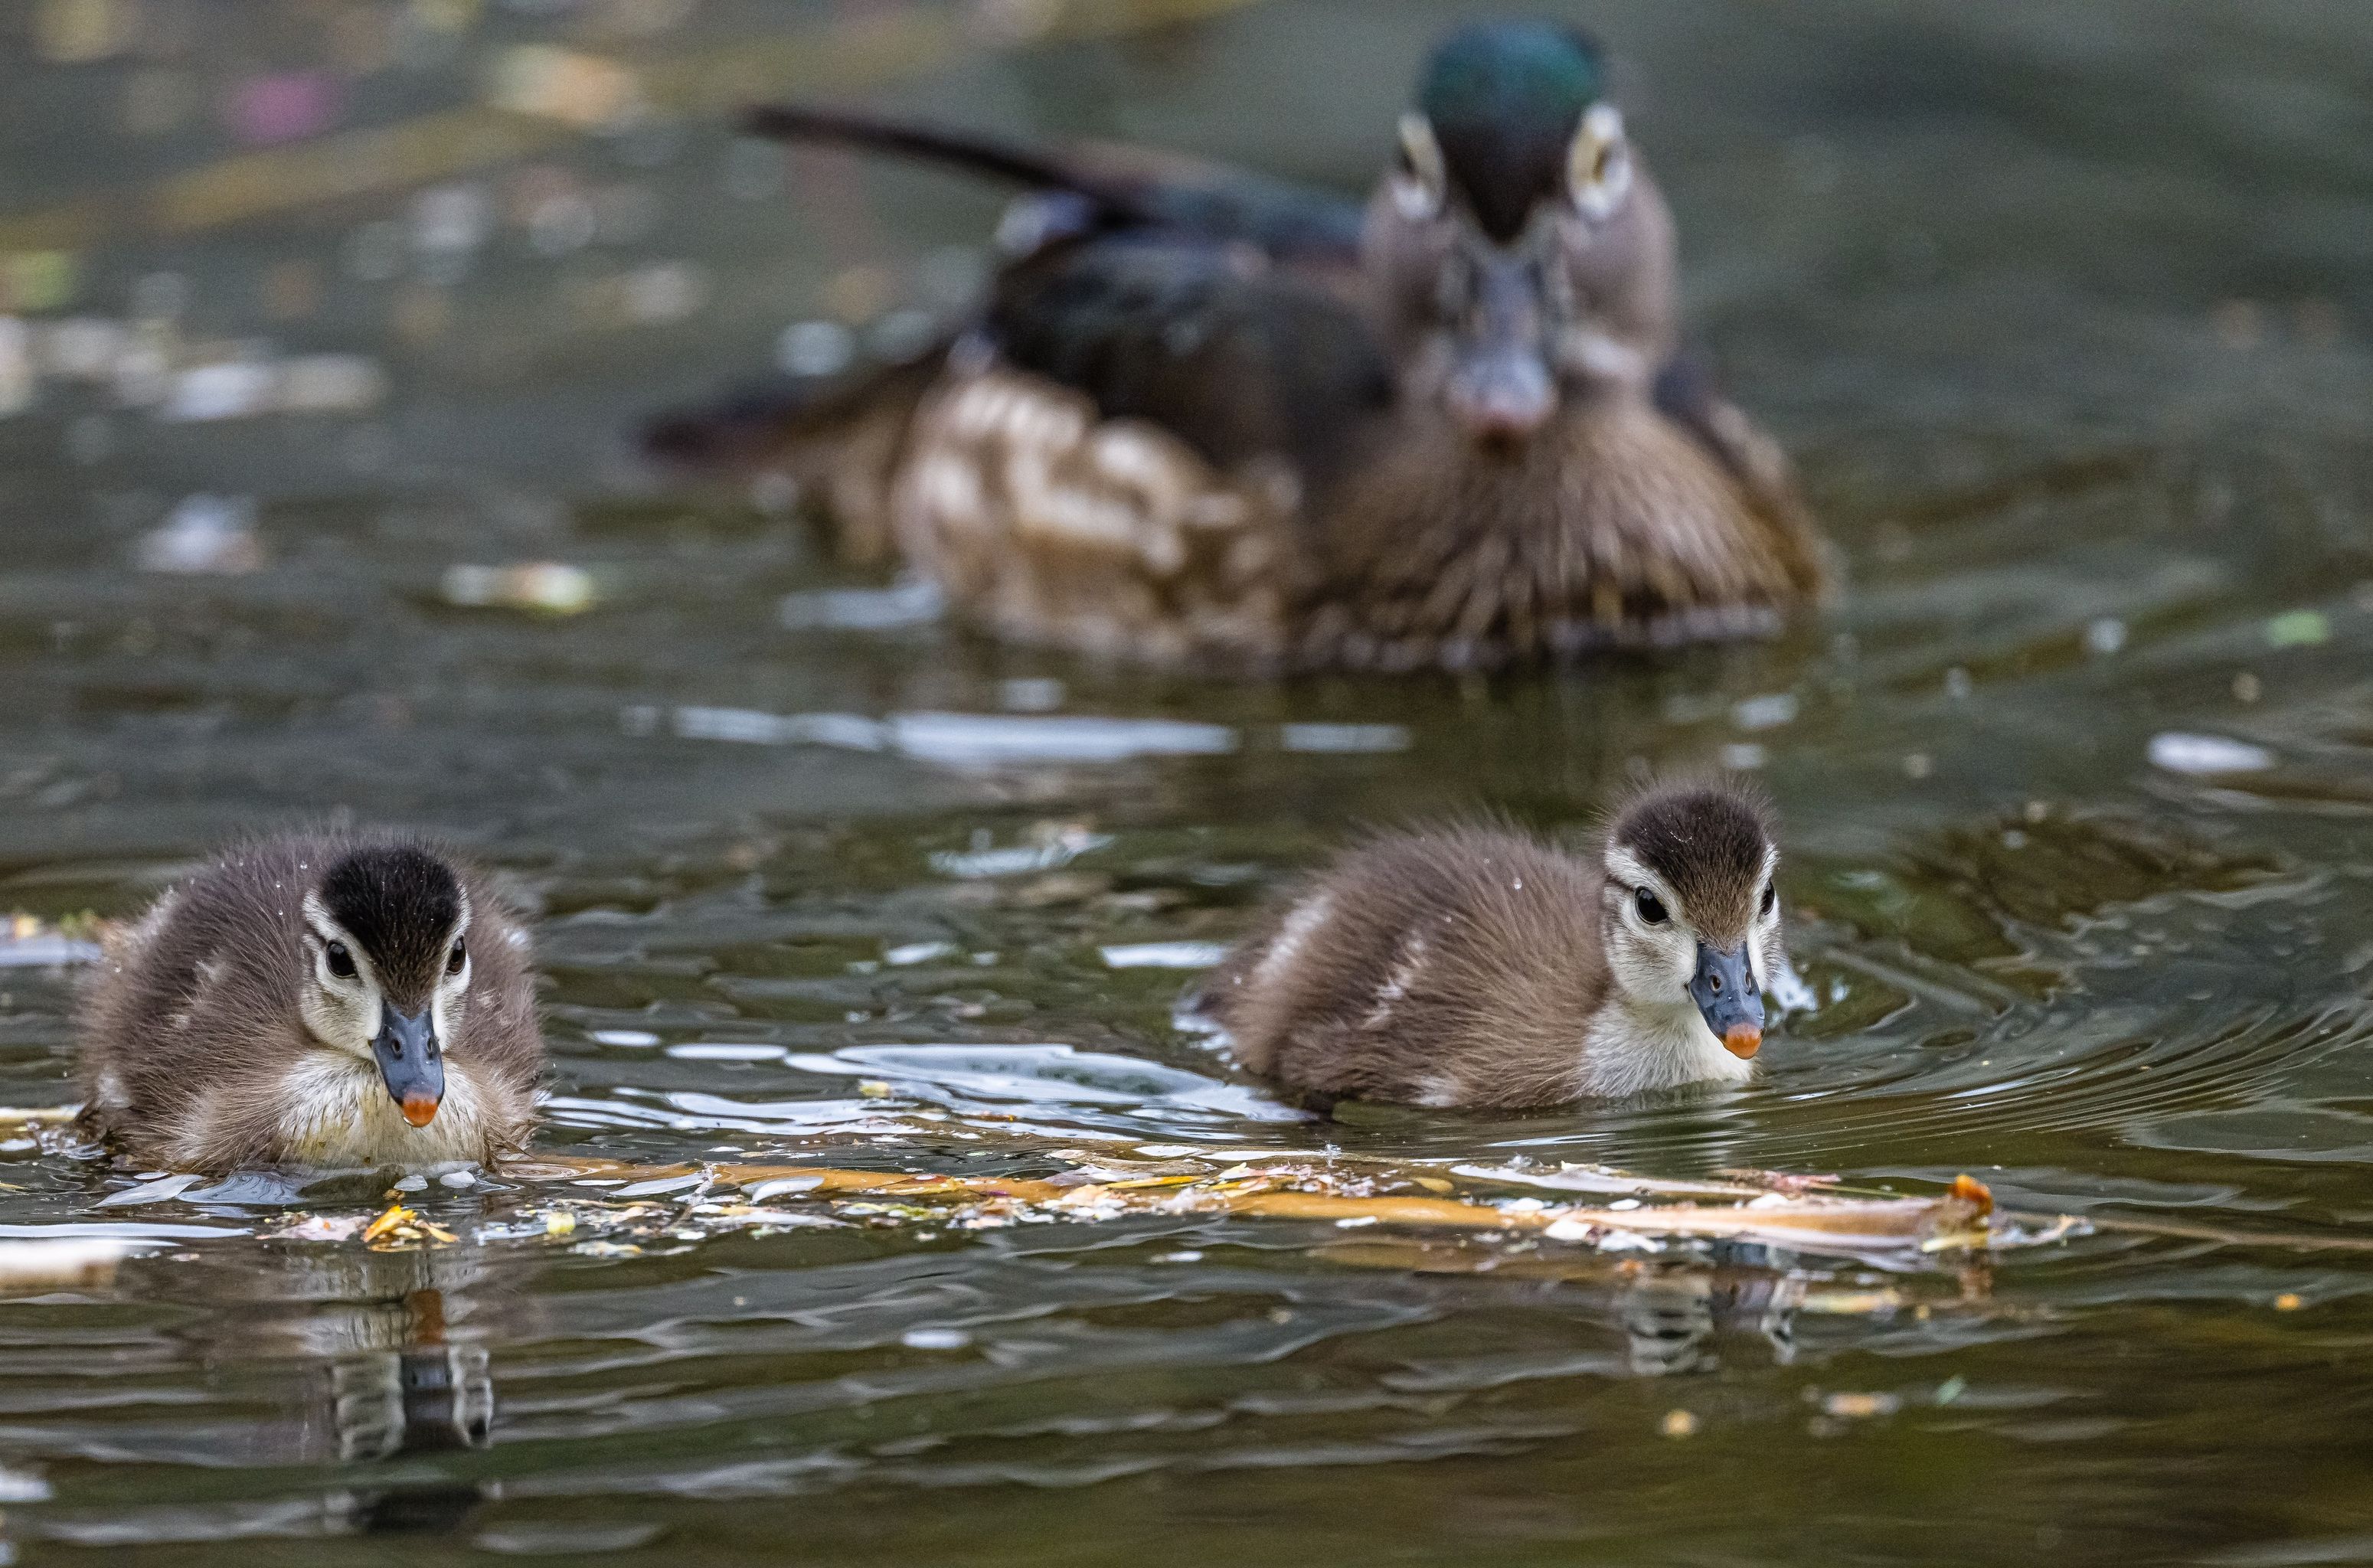 two fuzzy baby wood ducks swim in rippling water. Their larger mother is visible, blurred in the background